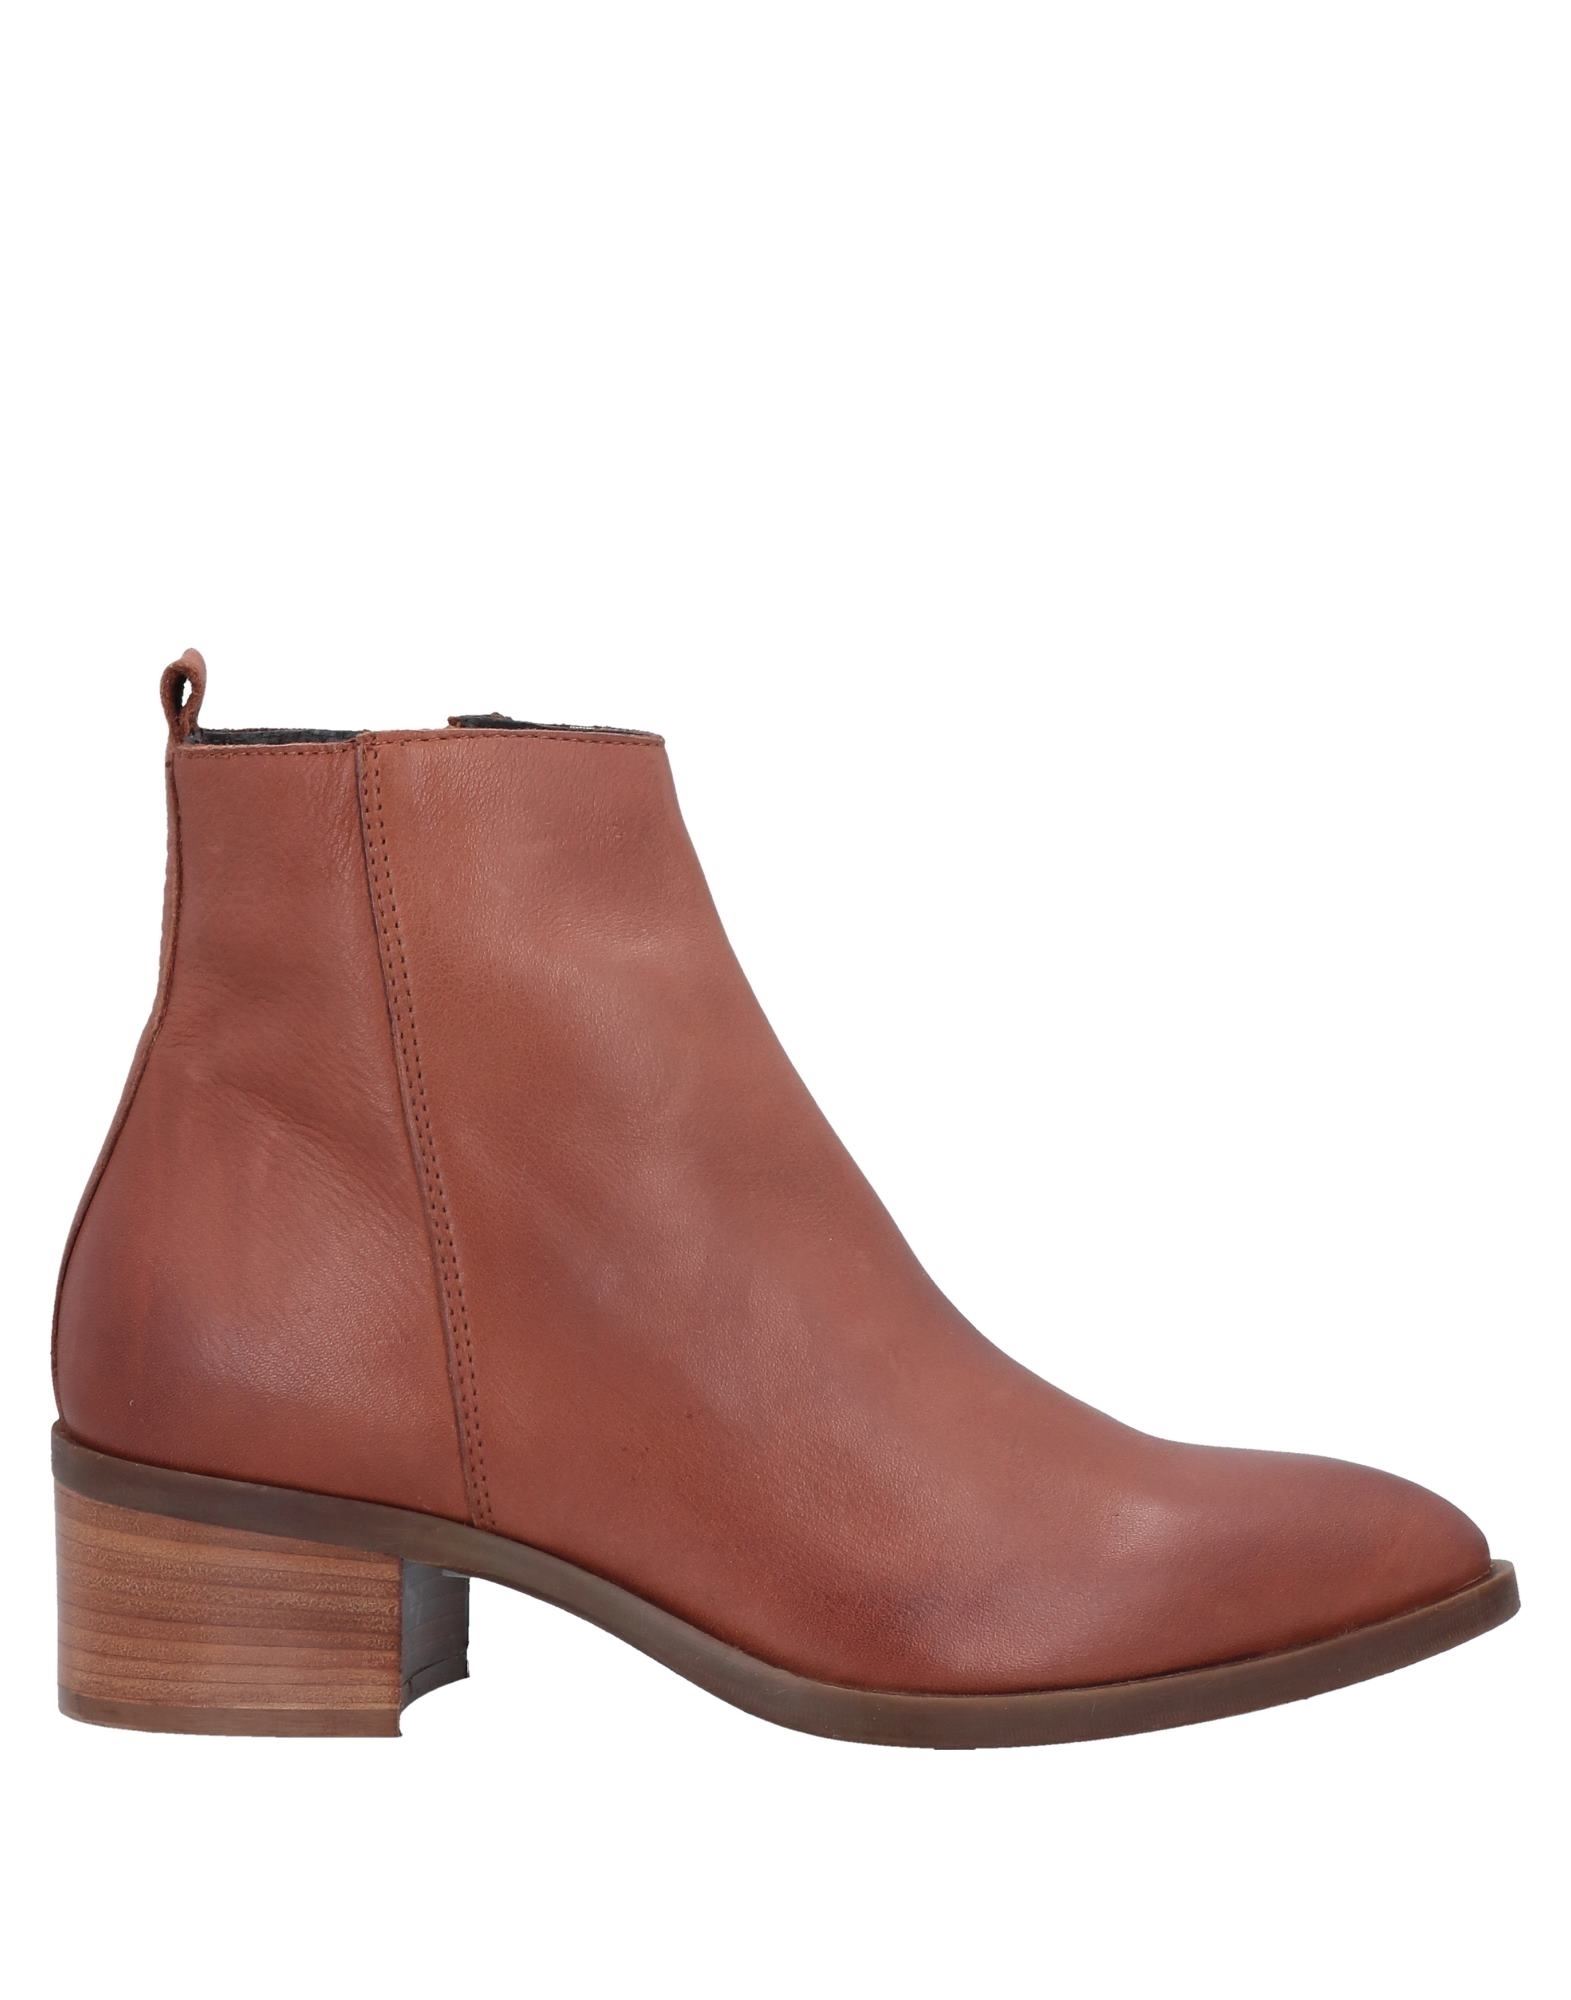 Tsd12 Ankle Boots In Tan